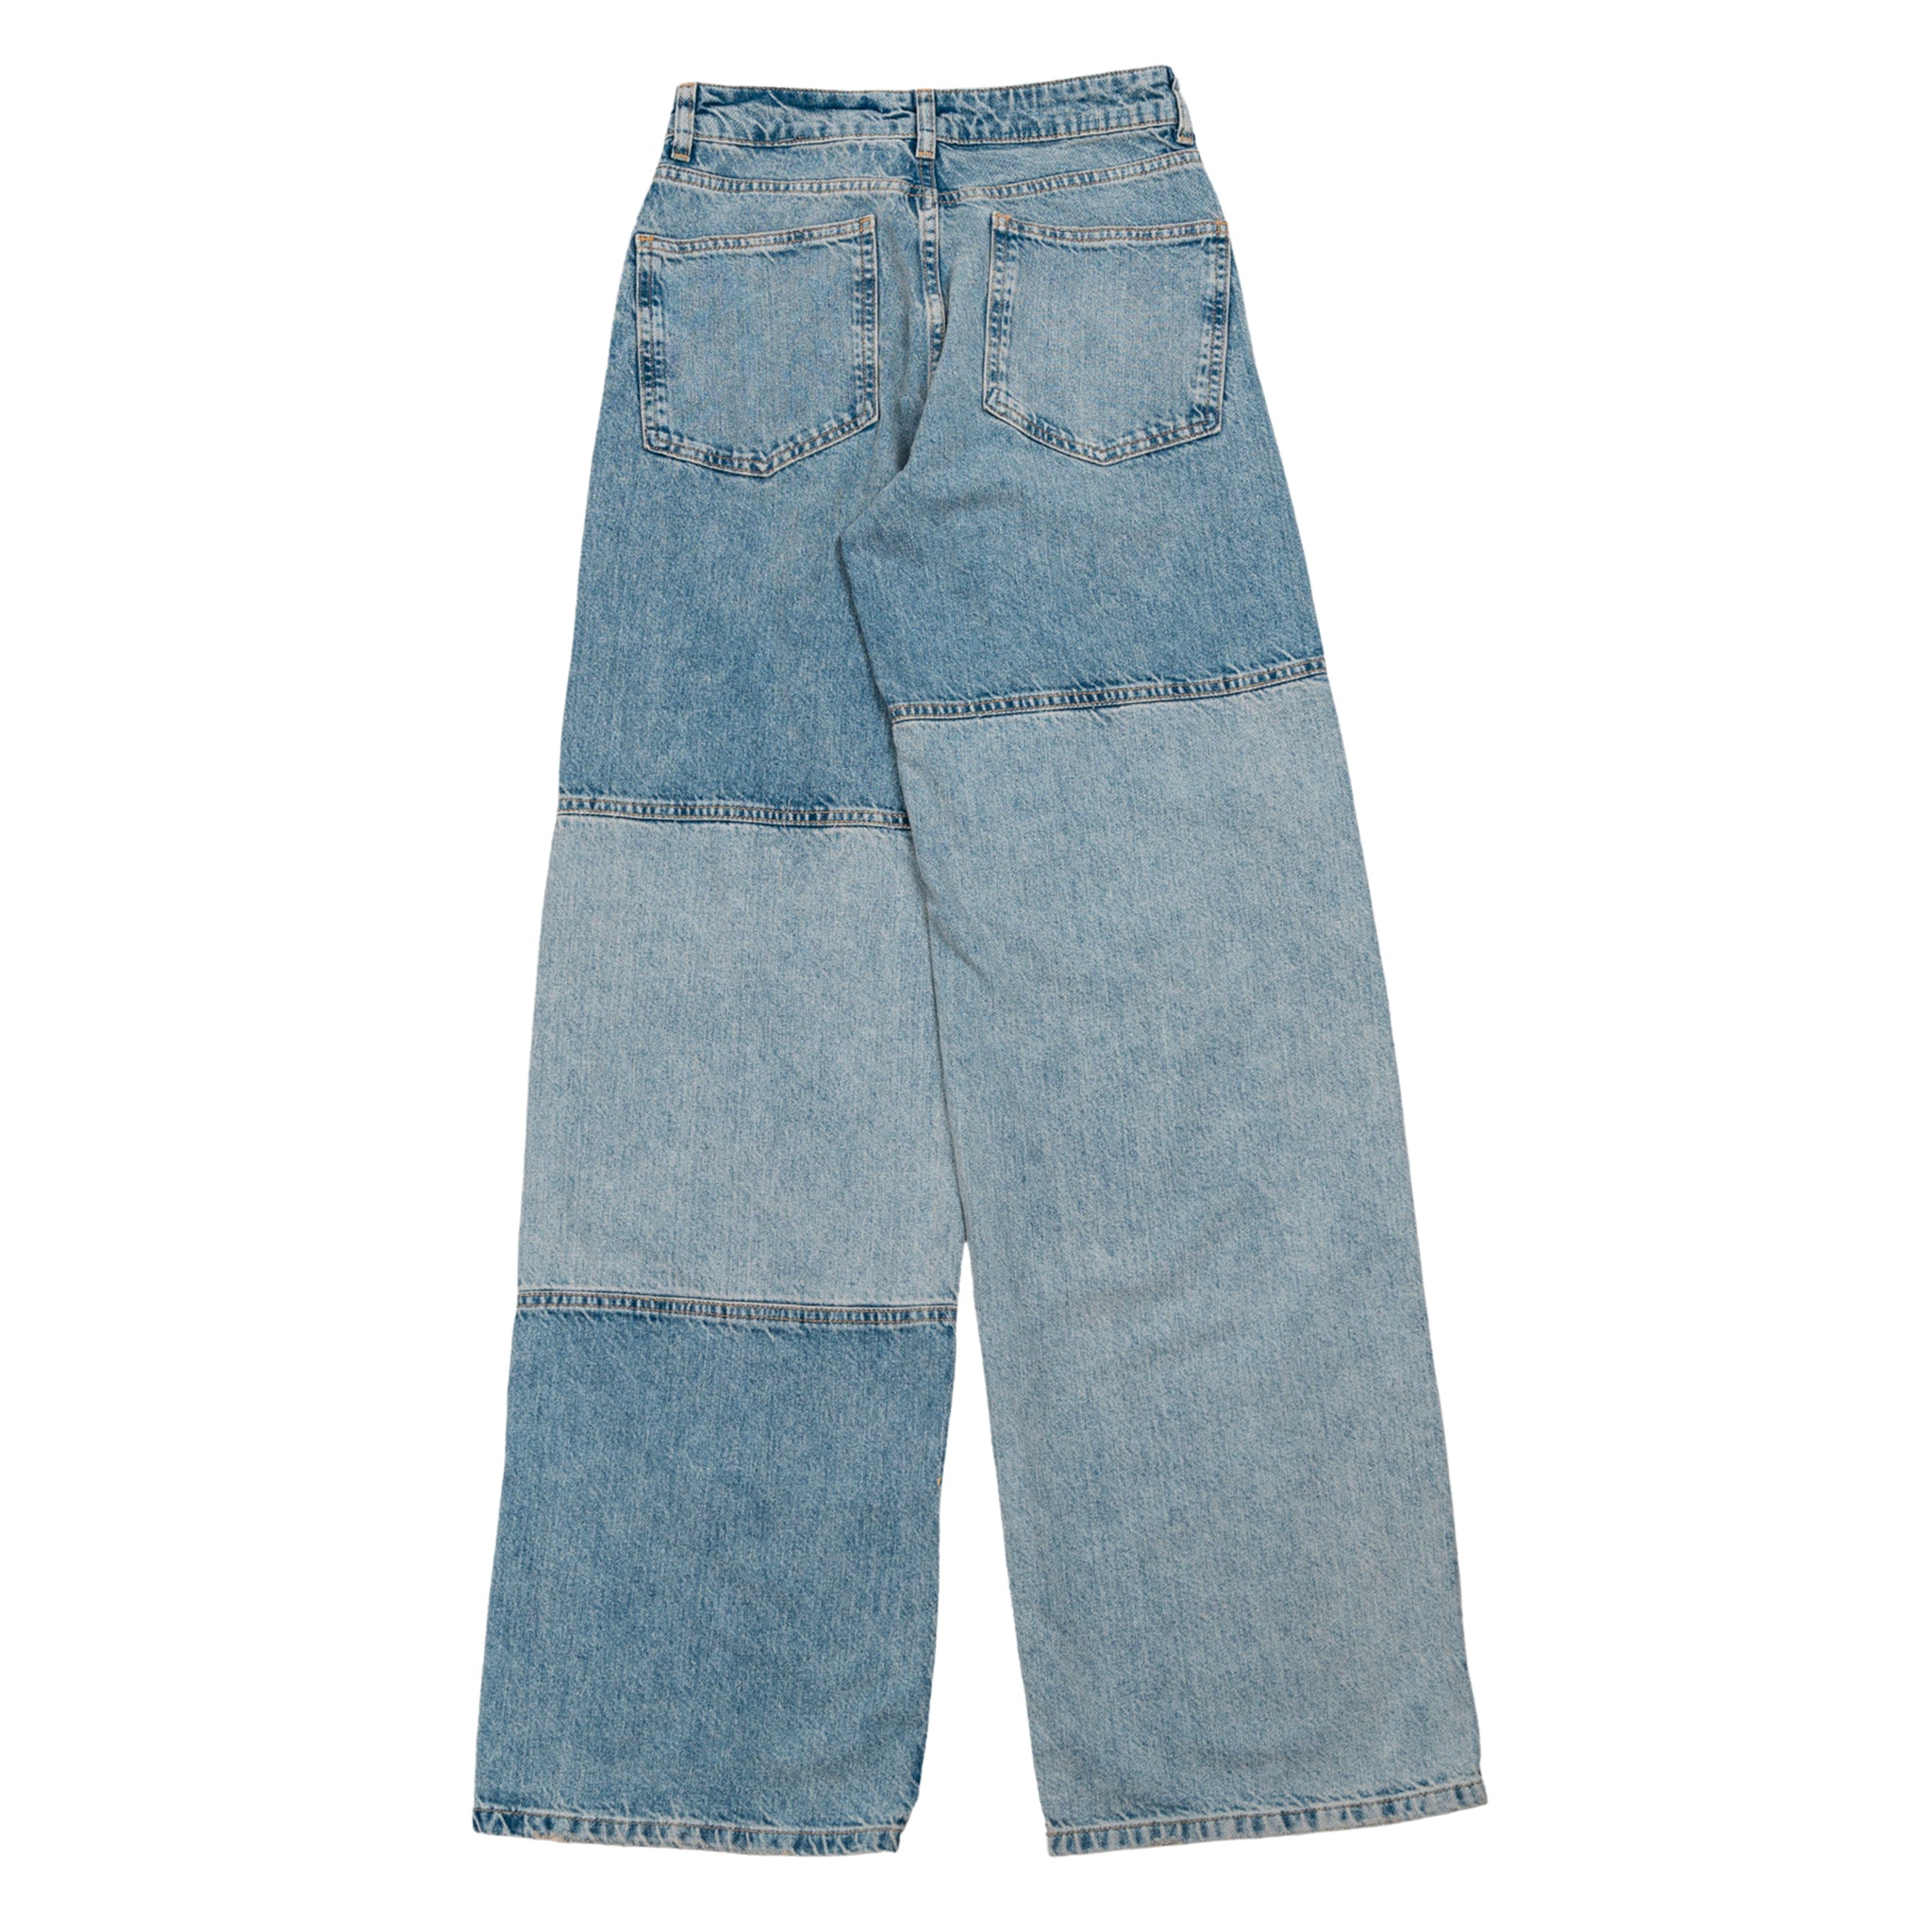 Faster Patchwork jeans